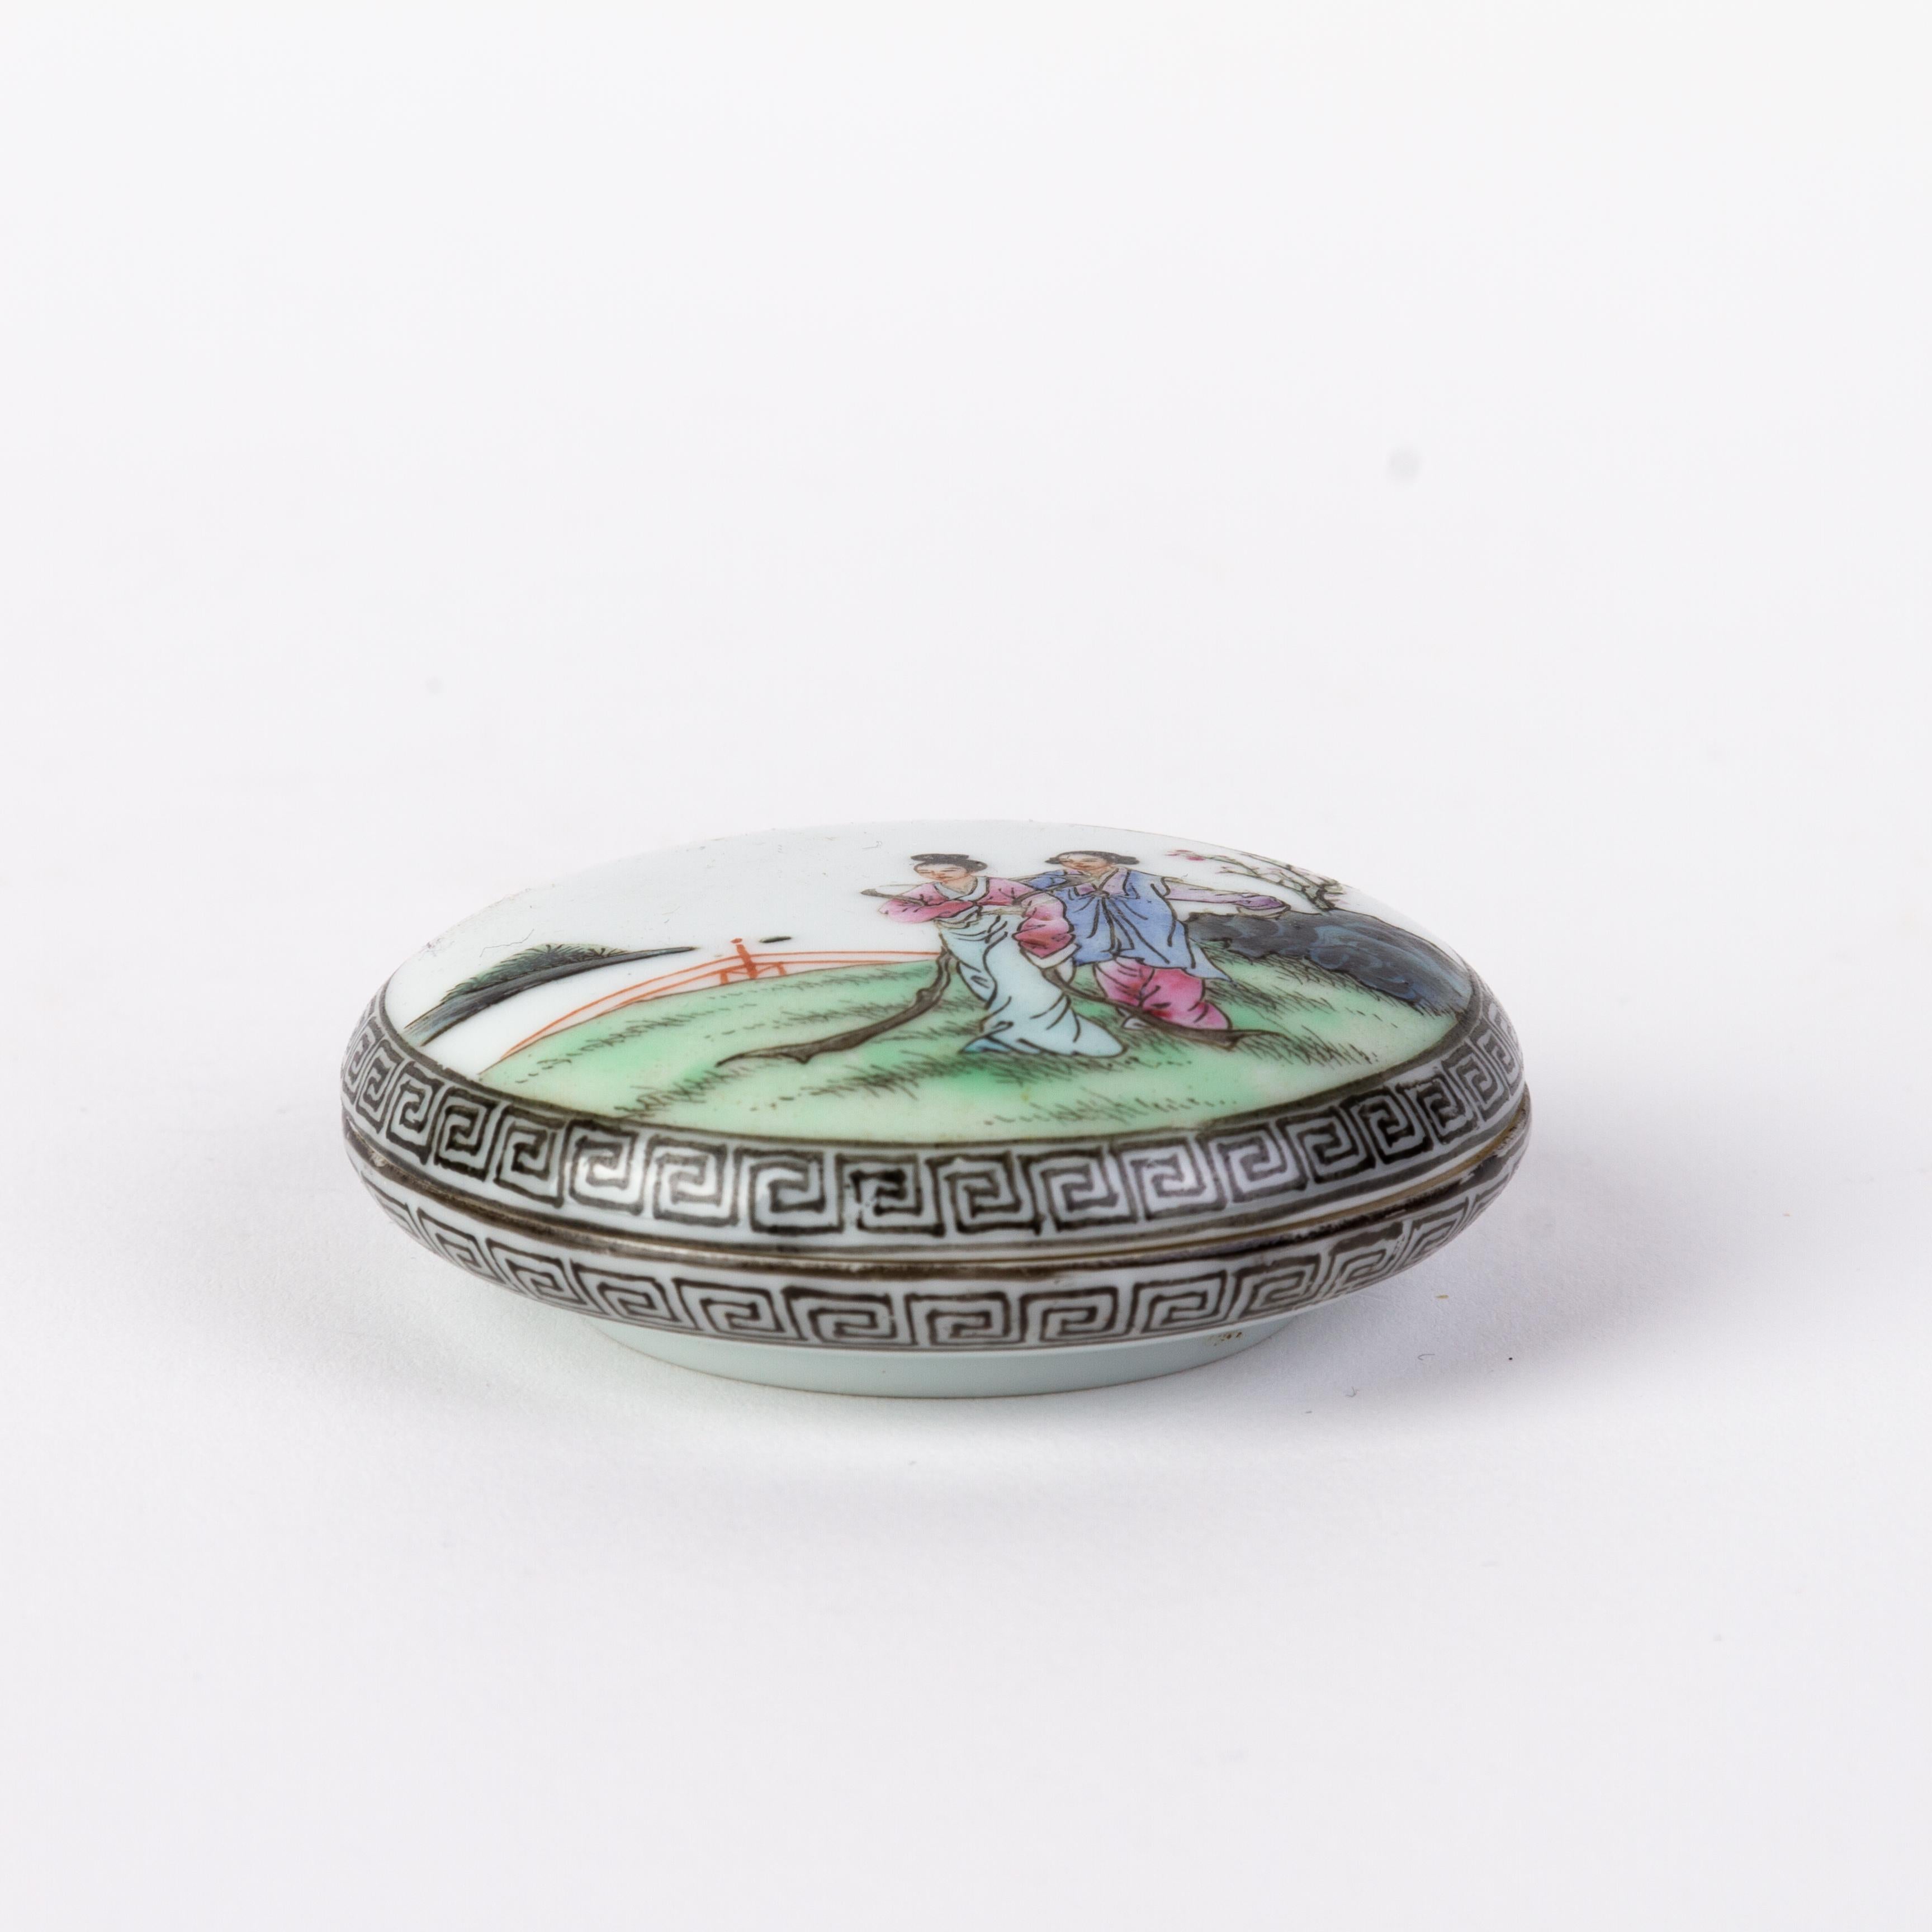 Chinese Republic Period Famille Rose Porcelain Box with Seal Early 20th Century For Sale 3